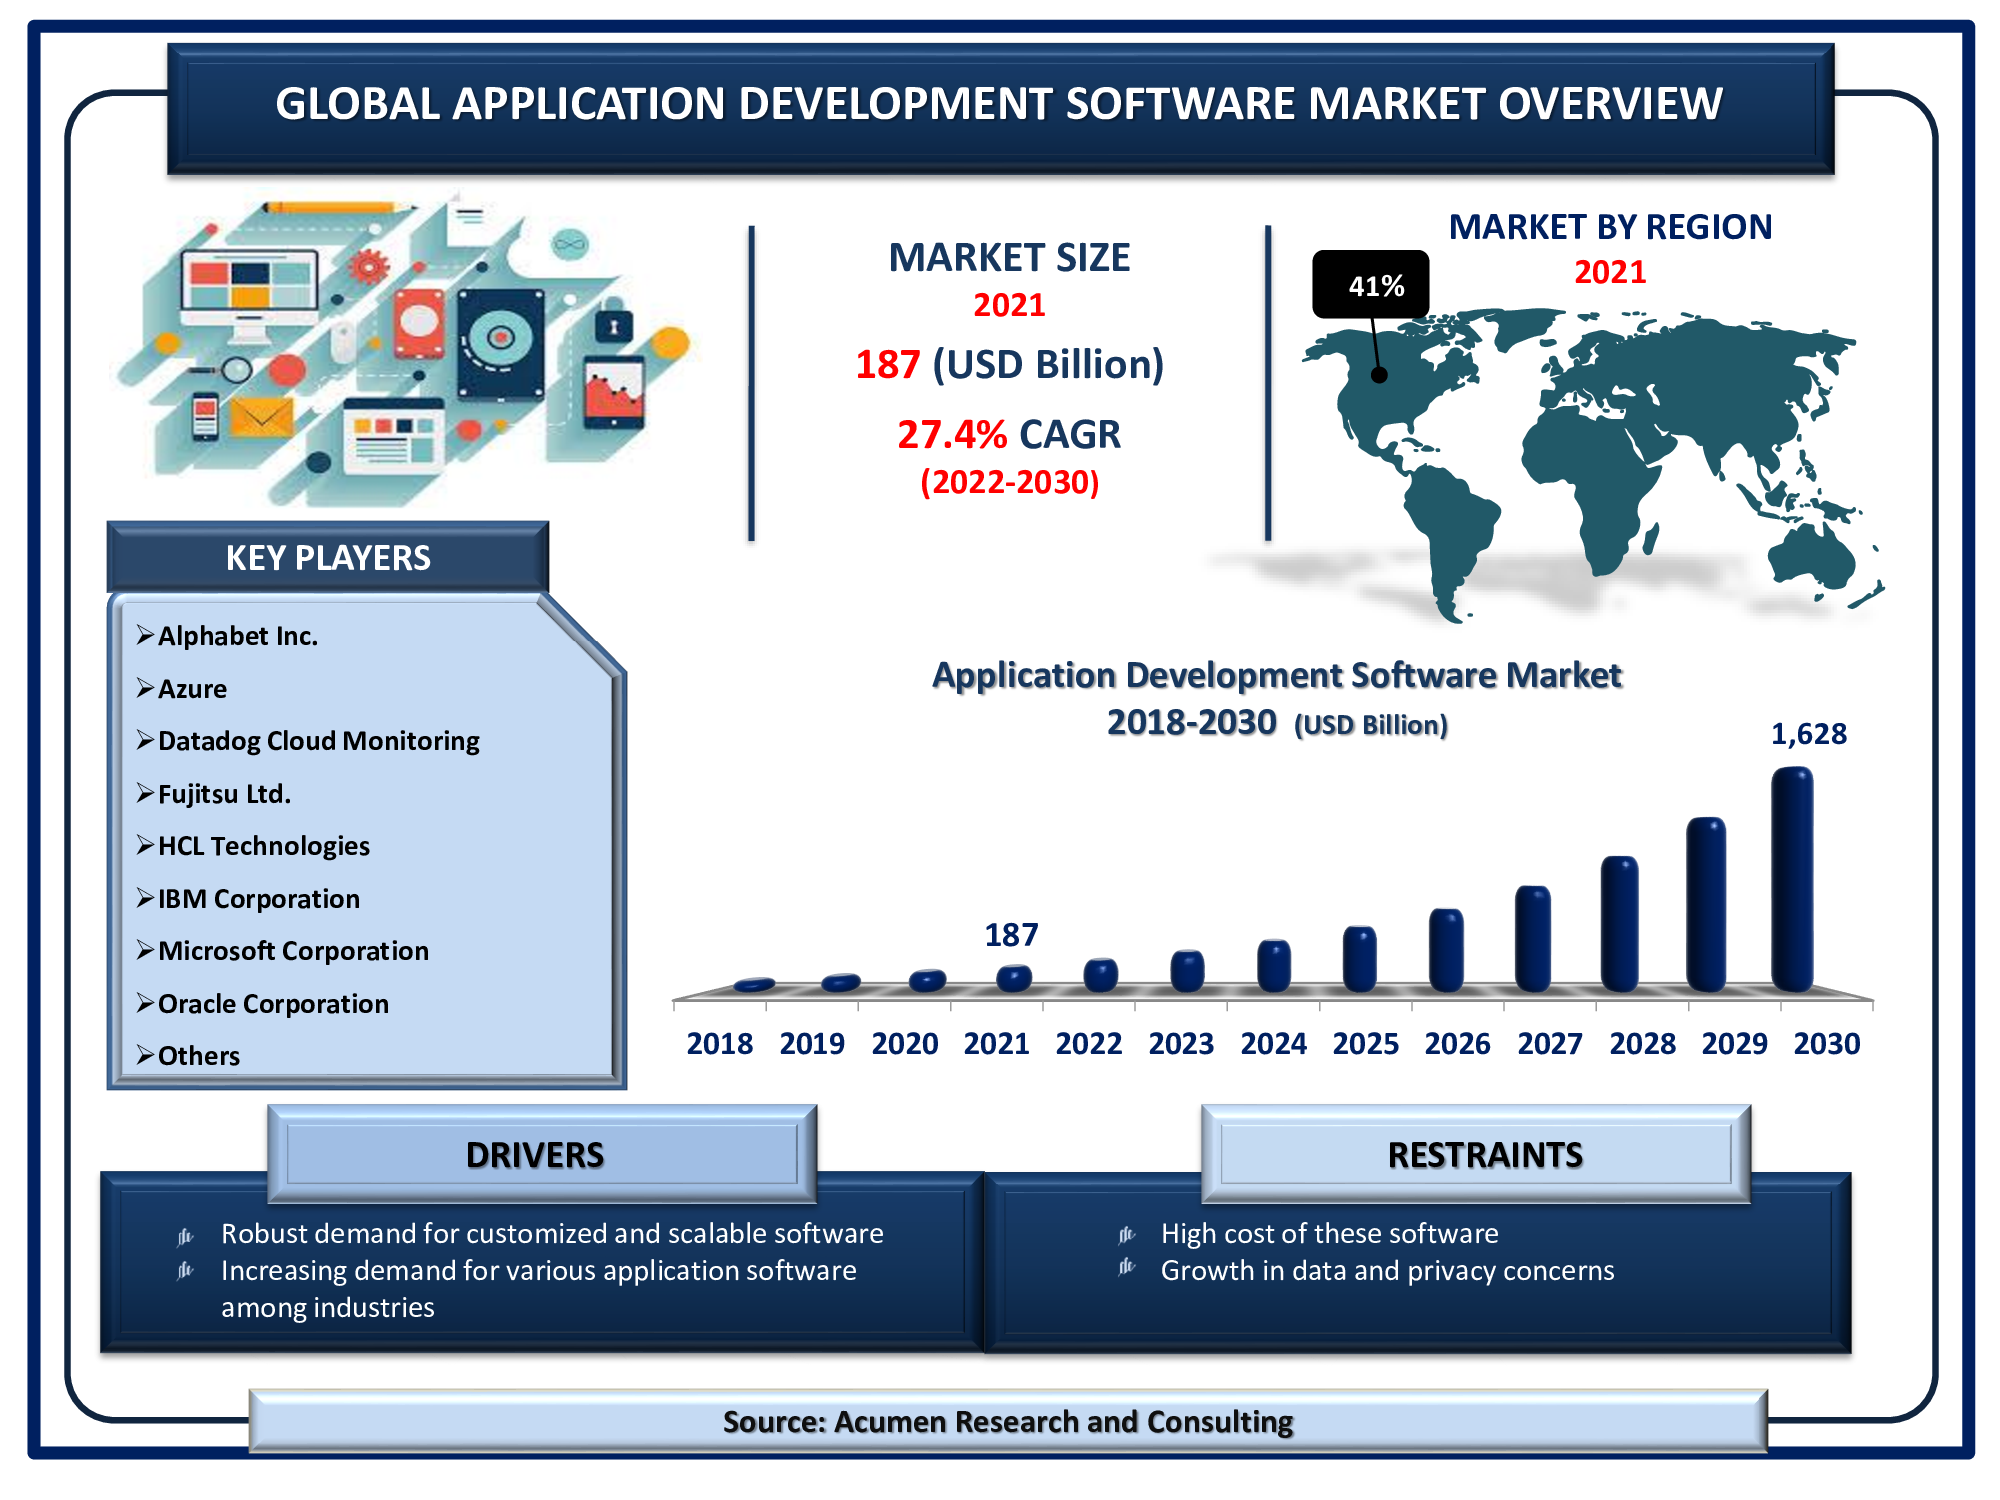 The Global Application Development Software Market Size accounted for USD 187 Billion in 2021 and is estimated to achieve a market size of USD 1,628 Billion by 2030; growing at a CAGR of 27.4%.